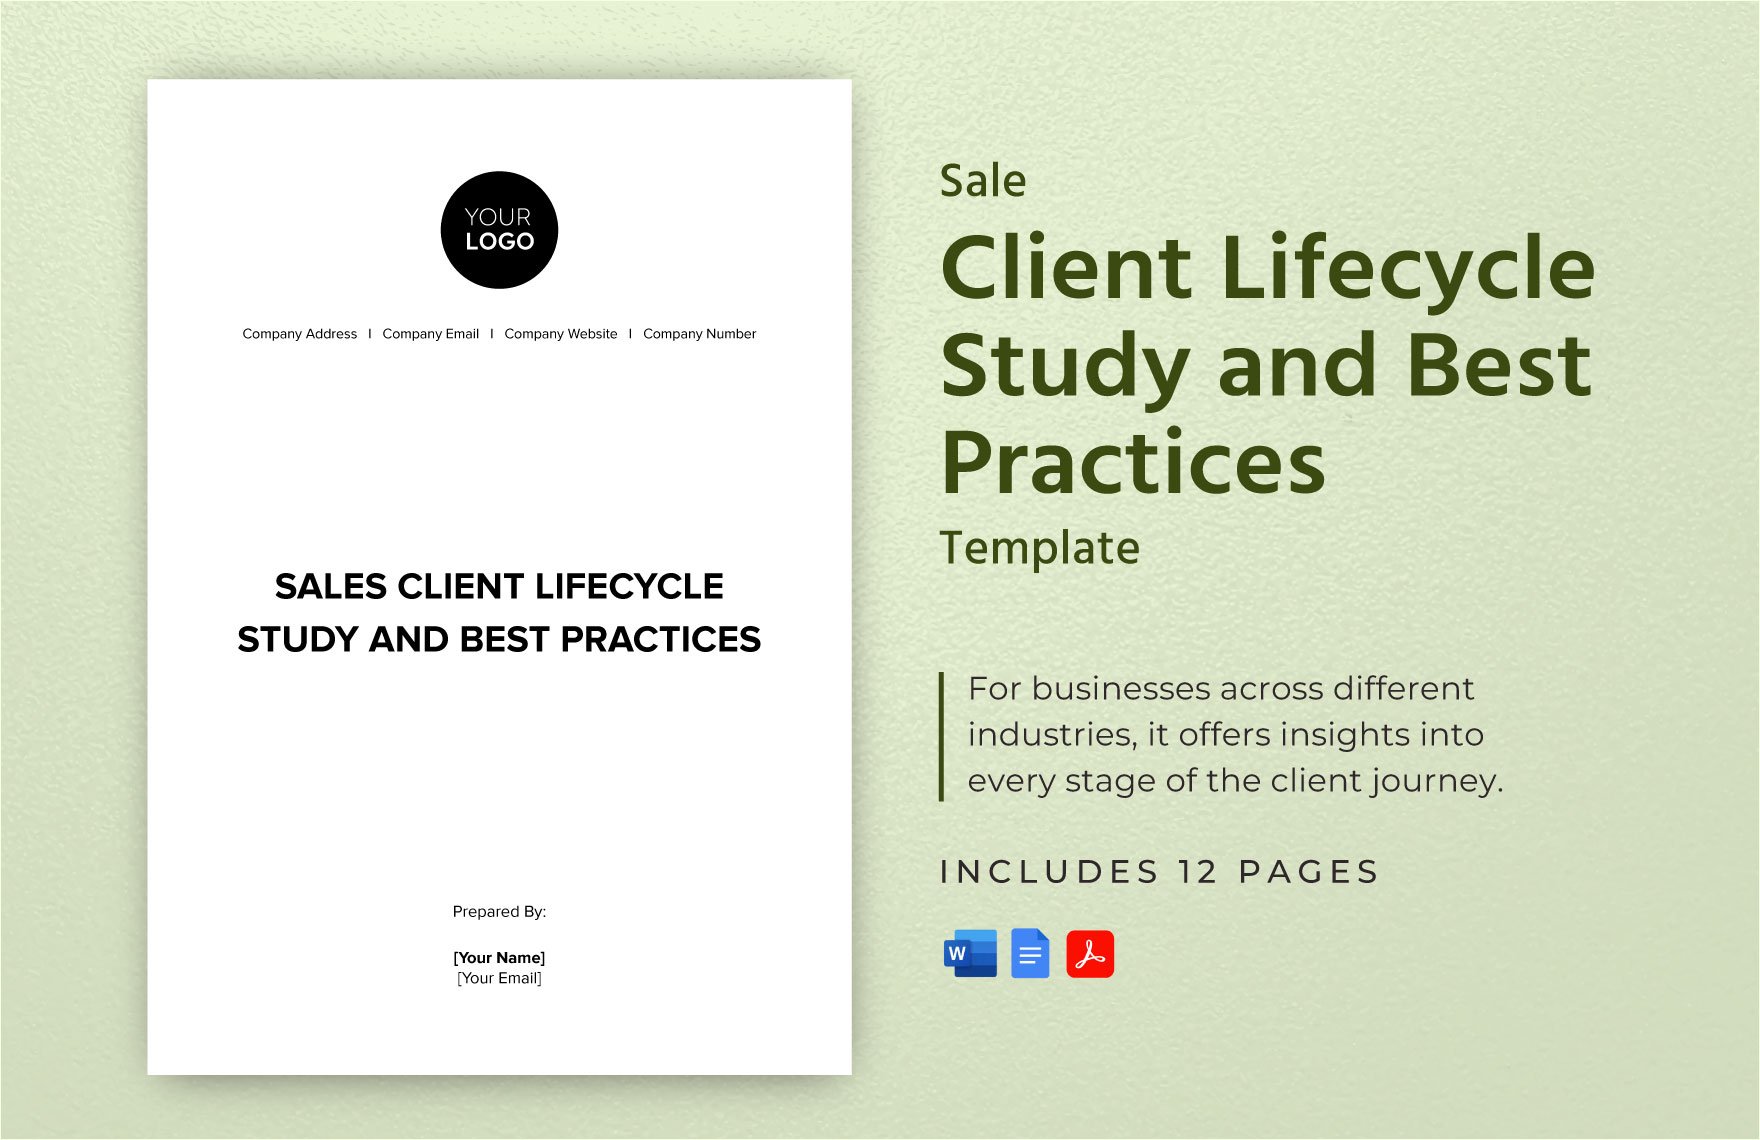 Sales Client Lifecycle Study and Best Practices Template